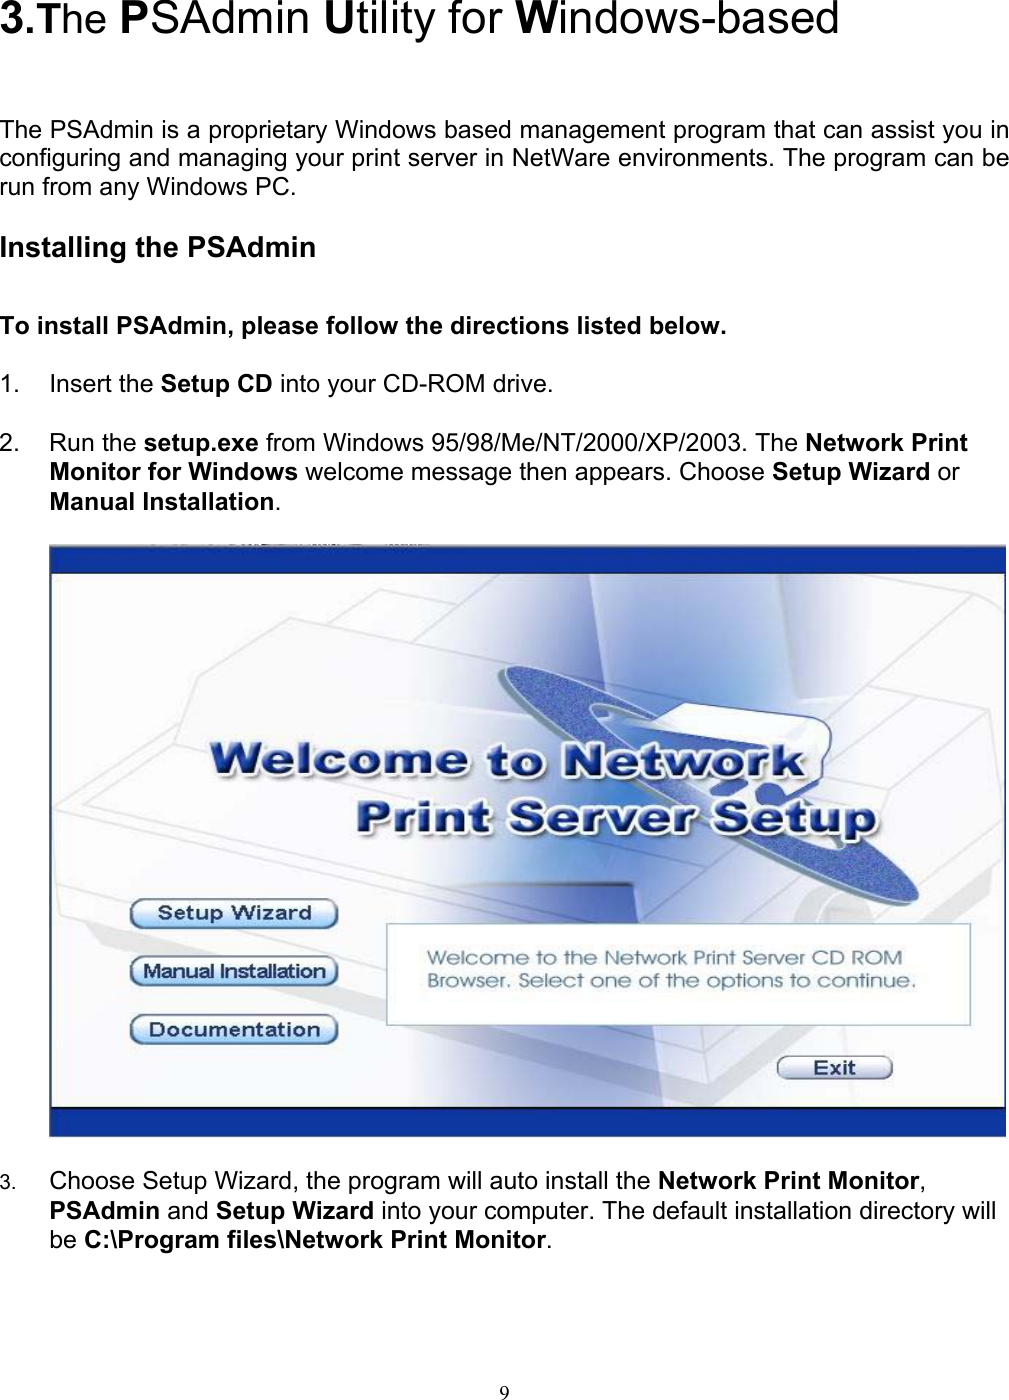                                                                                             9      3.The PSAdmin Utility for Windows-based   The PSAdmin is a proprietary Windows based management program that can assist you in configuring and managing your print server in NetWare environments. The program can be run from any Windows PC.  Installing the PSAdmin  To install PSAdmin, please follow the directions listed below.  1. Insert the Setup CD into your CD-ROM drive.  2. Run the setup.exe from Windows 95/98/Me/NT/2000/XP/2003. The Network Print Monitor for Windows welcome message then appears. Choose Setup Wizard or Manual Installation.    3.  Choose Setup Wizard, the program will auto install the Network Print Monitor, PSAdmin and Setup Wizard into your computer. The default installation directory will be C:\Program files\Network Print Monitor.   